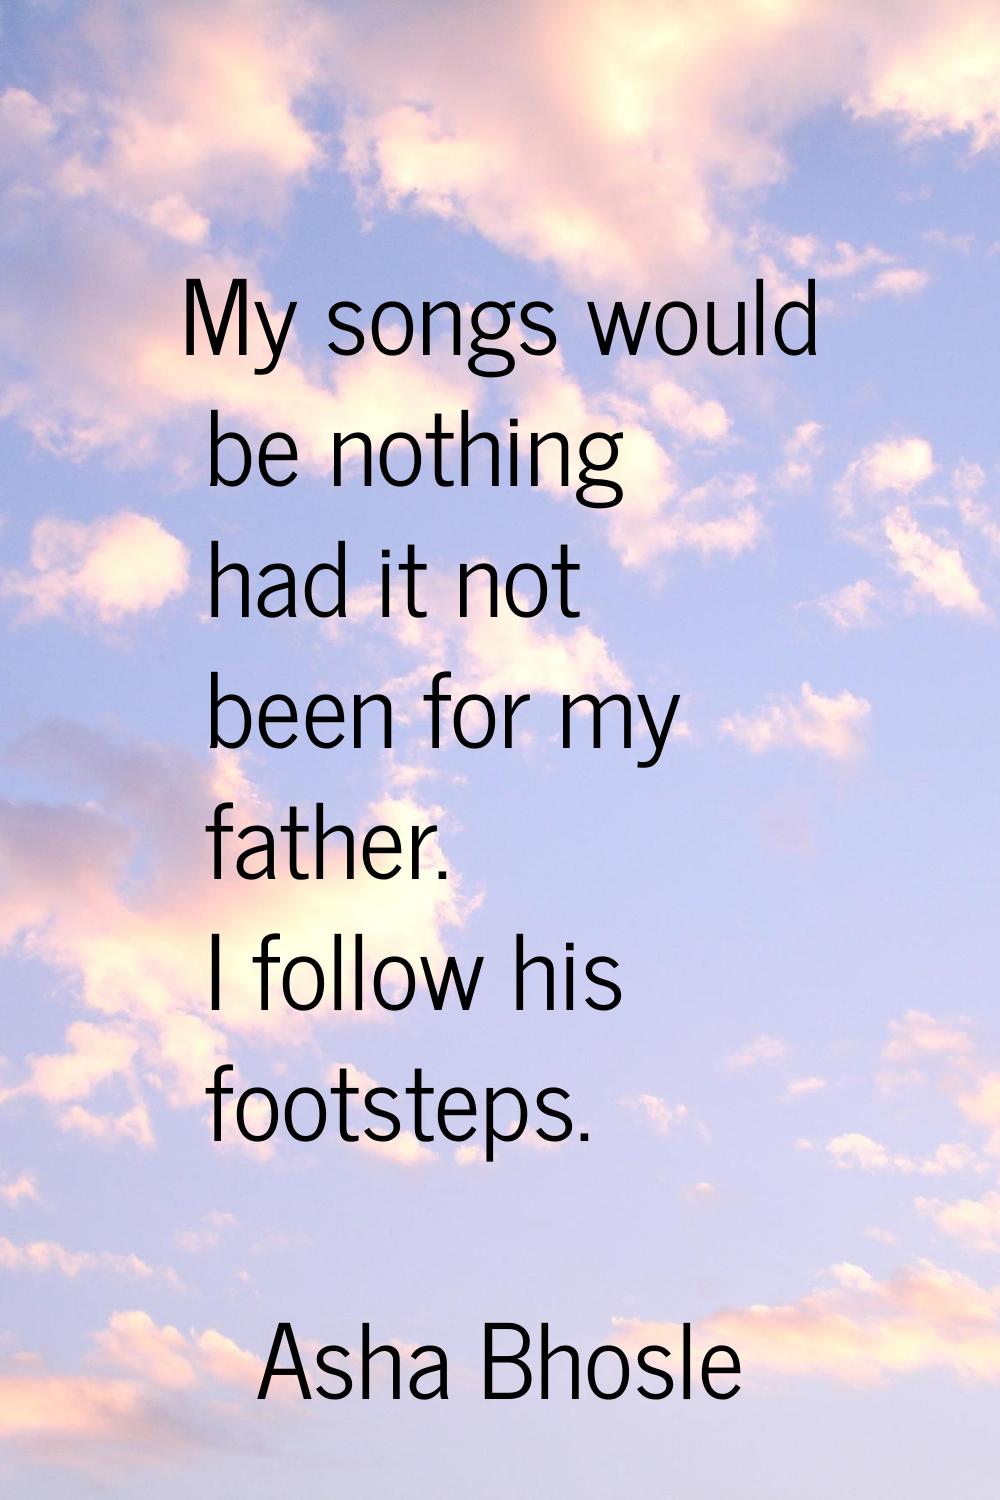 My songs would be nothing had it not been for my father. I follow his footsteps.